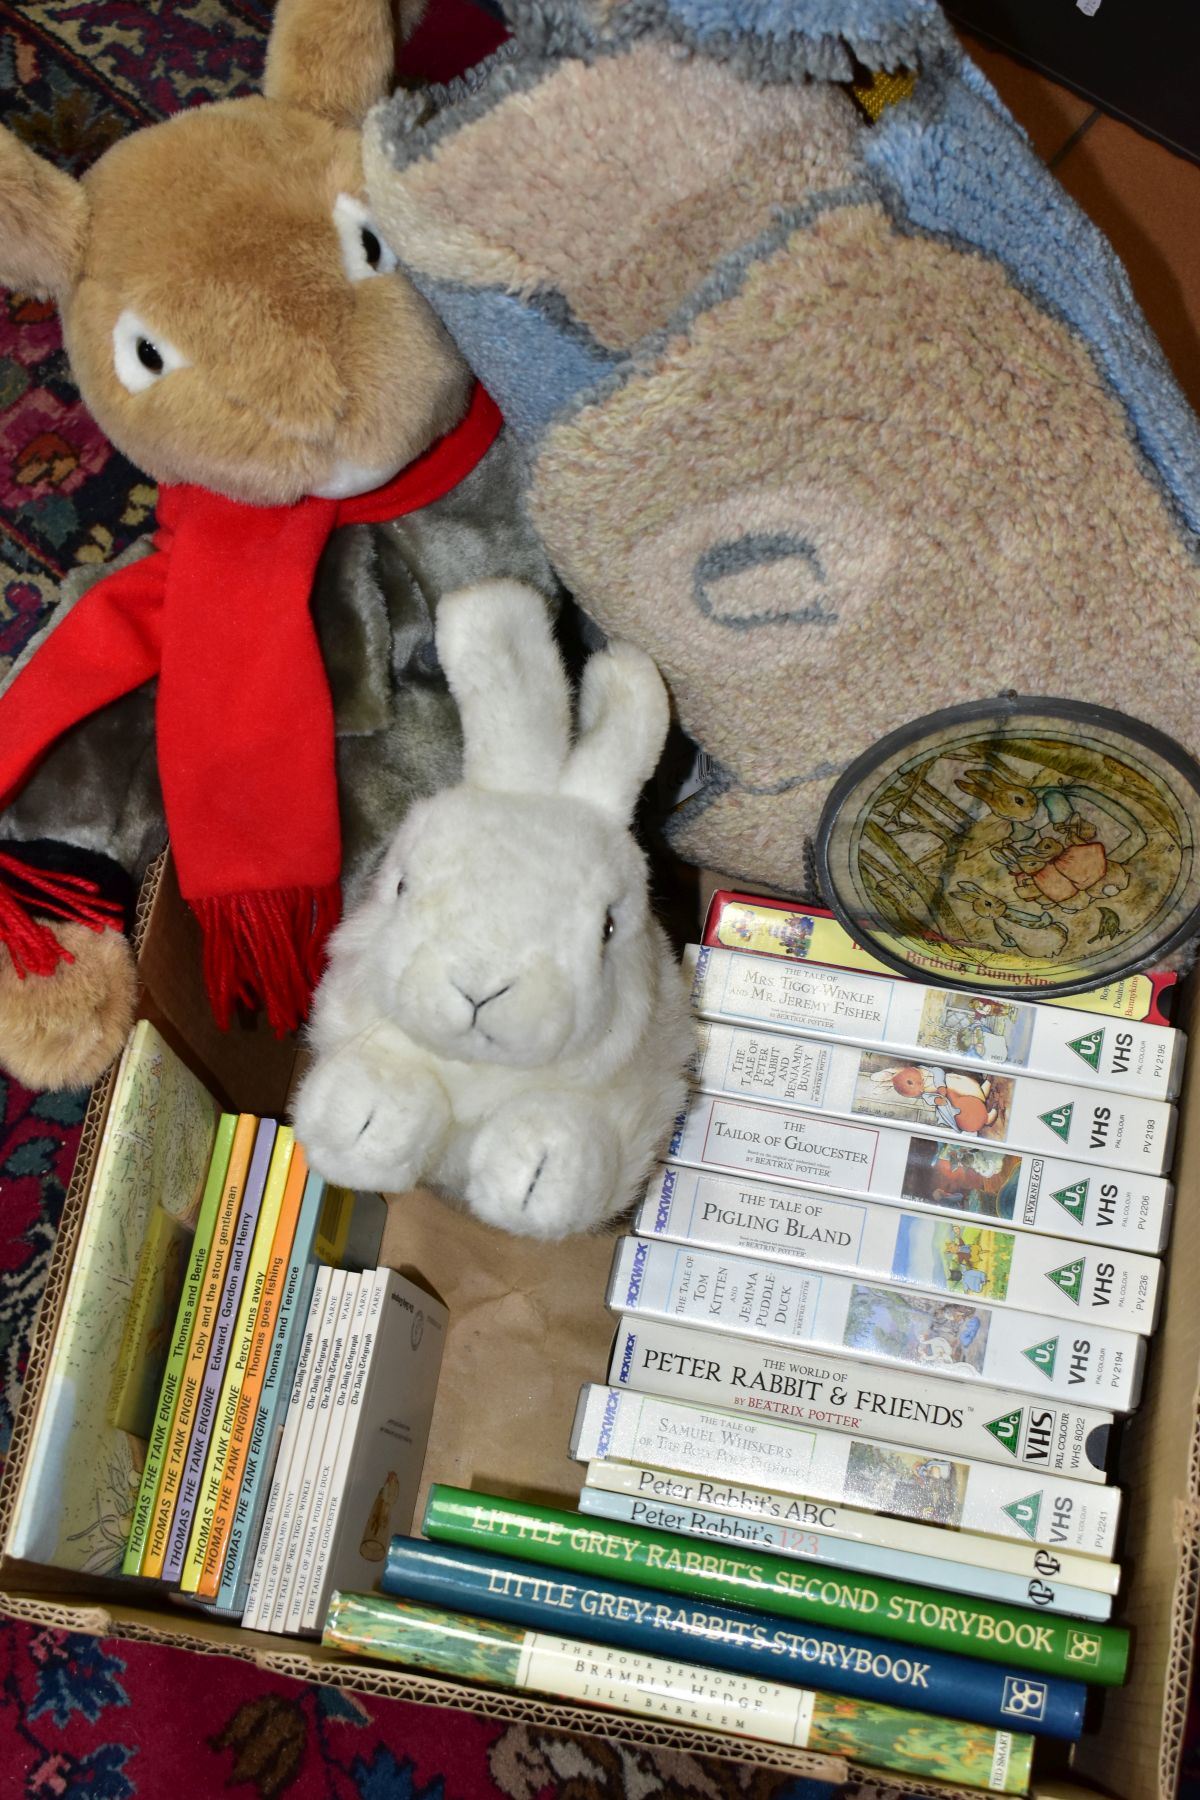 TWO BOXES AND LOOSE BEATRIX POTTER'S PETER RABBIT CERAMICS, SOFT TOYS, VHS CASSETTES, BOOKS, OTHER - Image 3 of 5